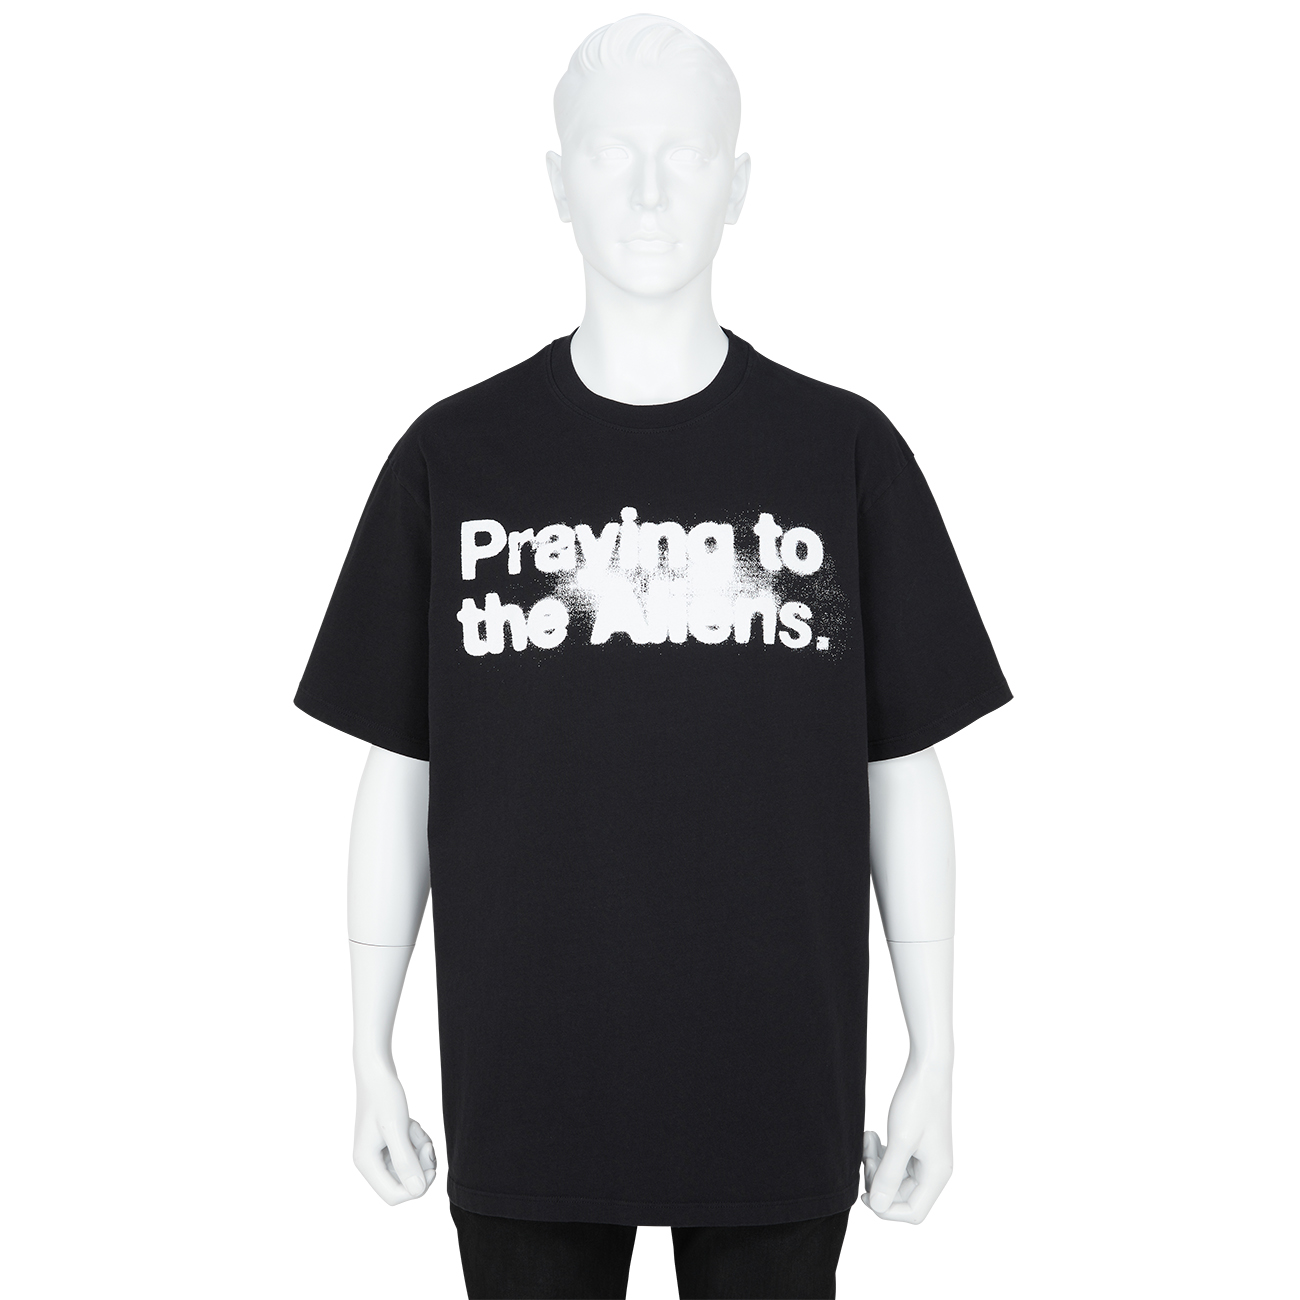 MARVIN (マーヴィン) - PRAYING TO THE ALIENS T-SHIRT BLACKの詳細画像1